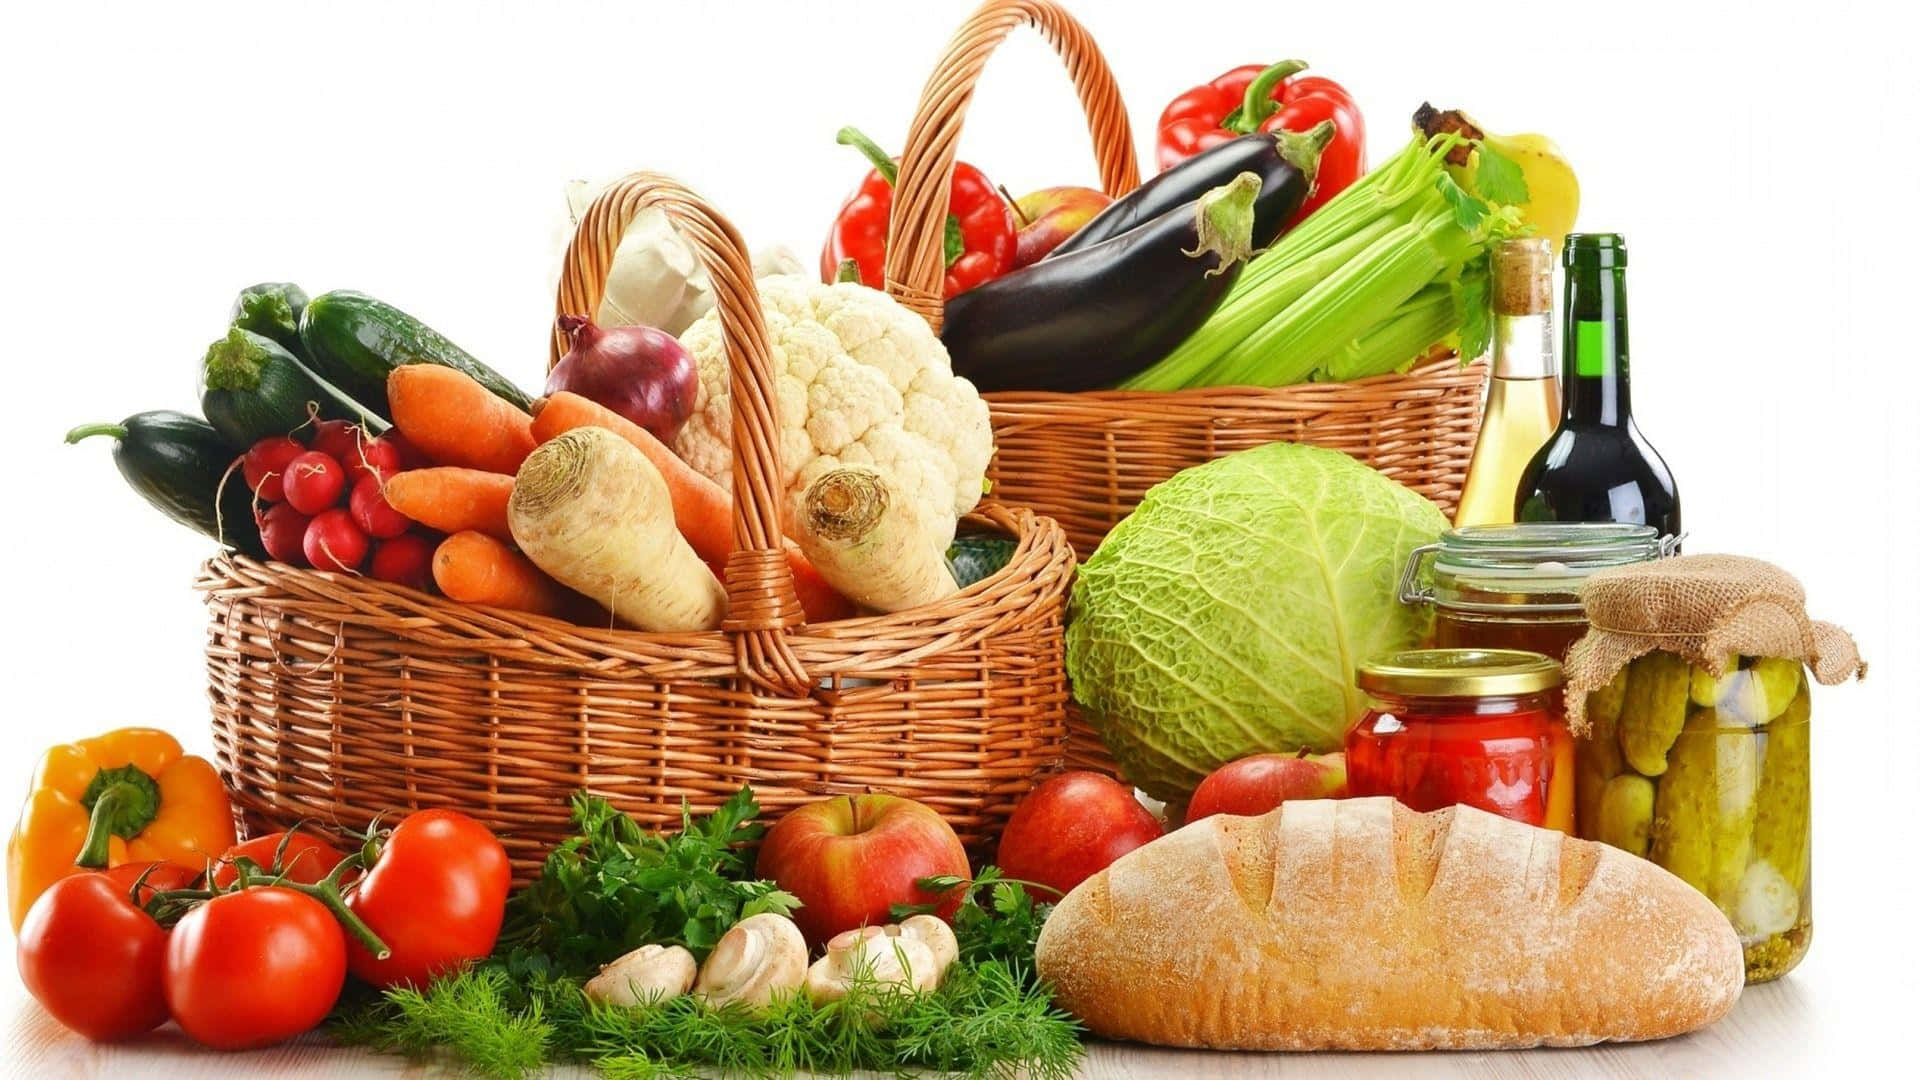 Healthy Food In Picnic Baskets Picture